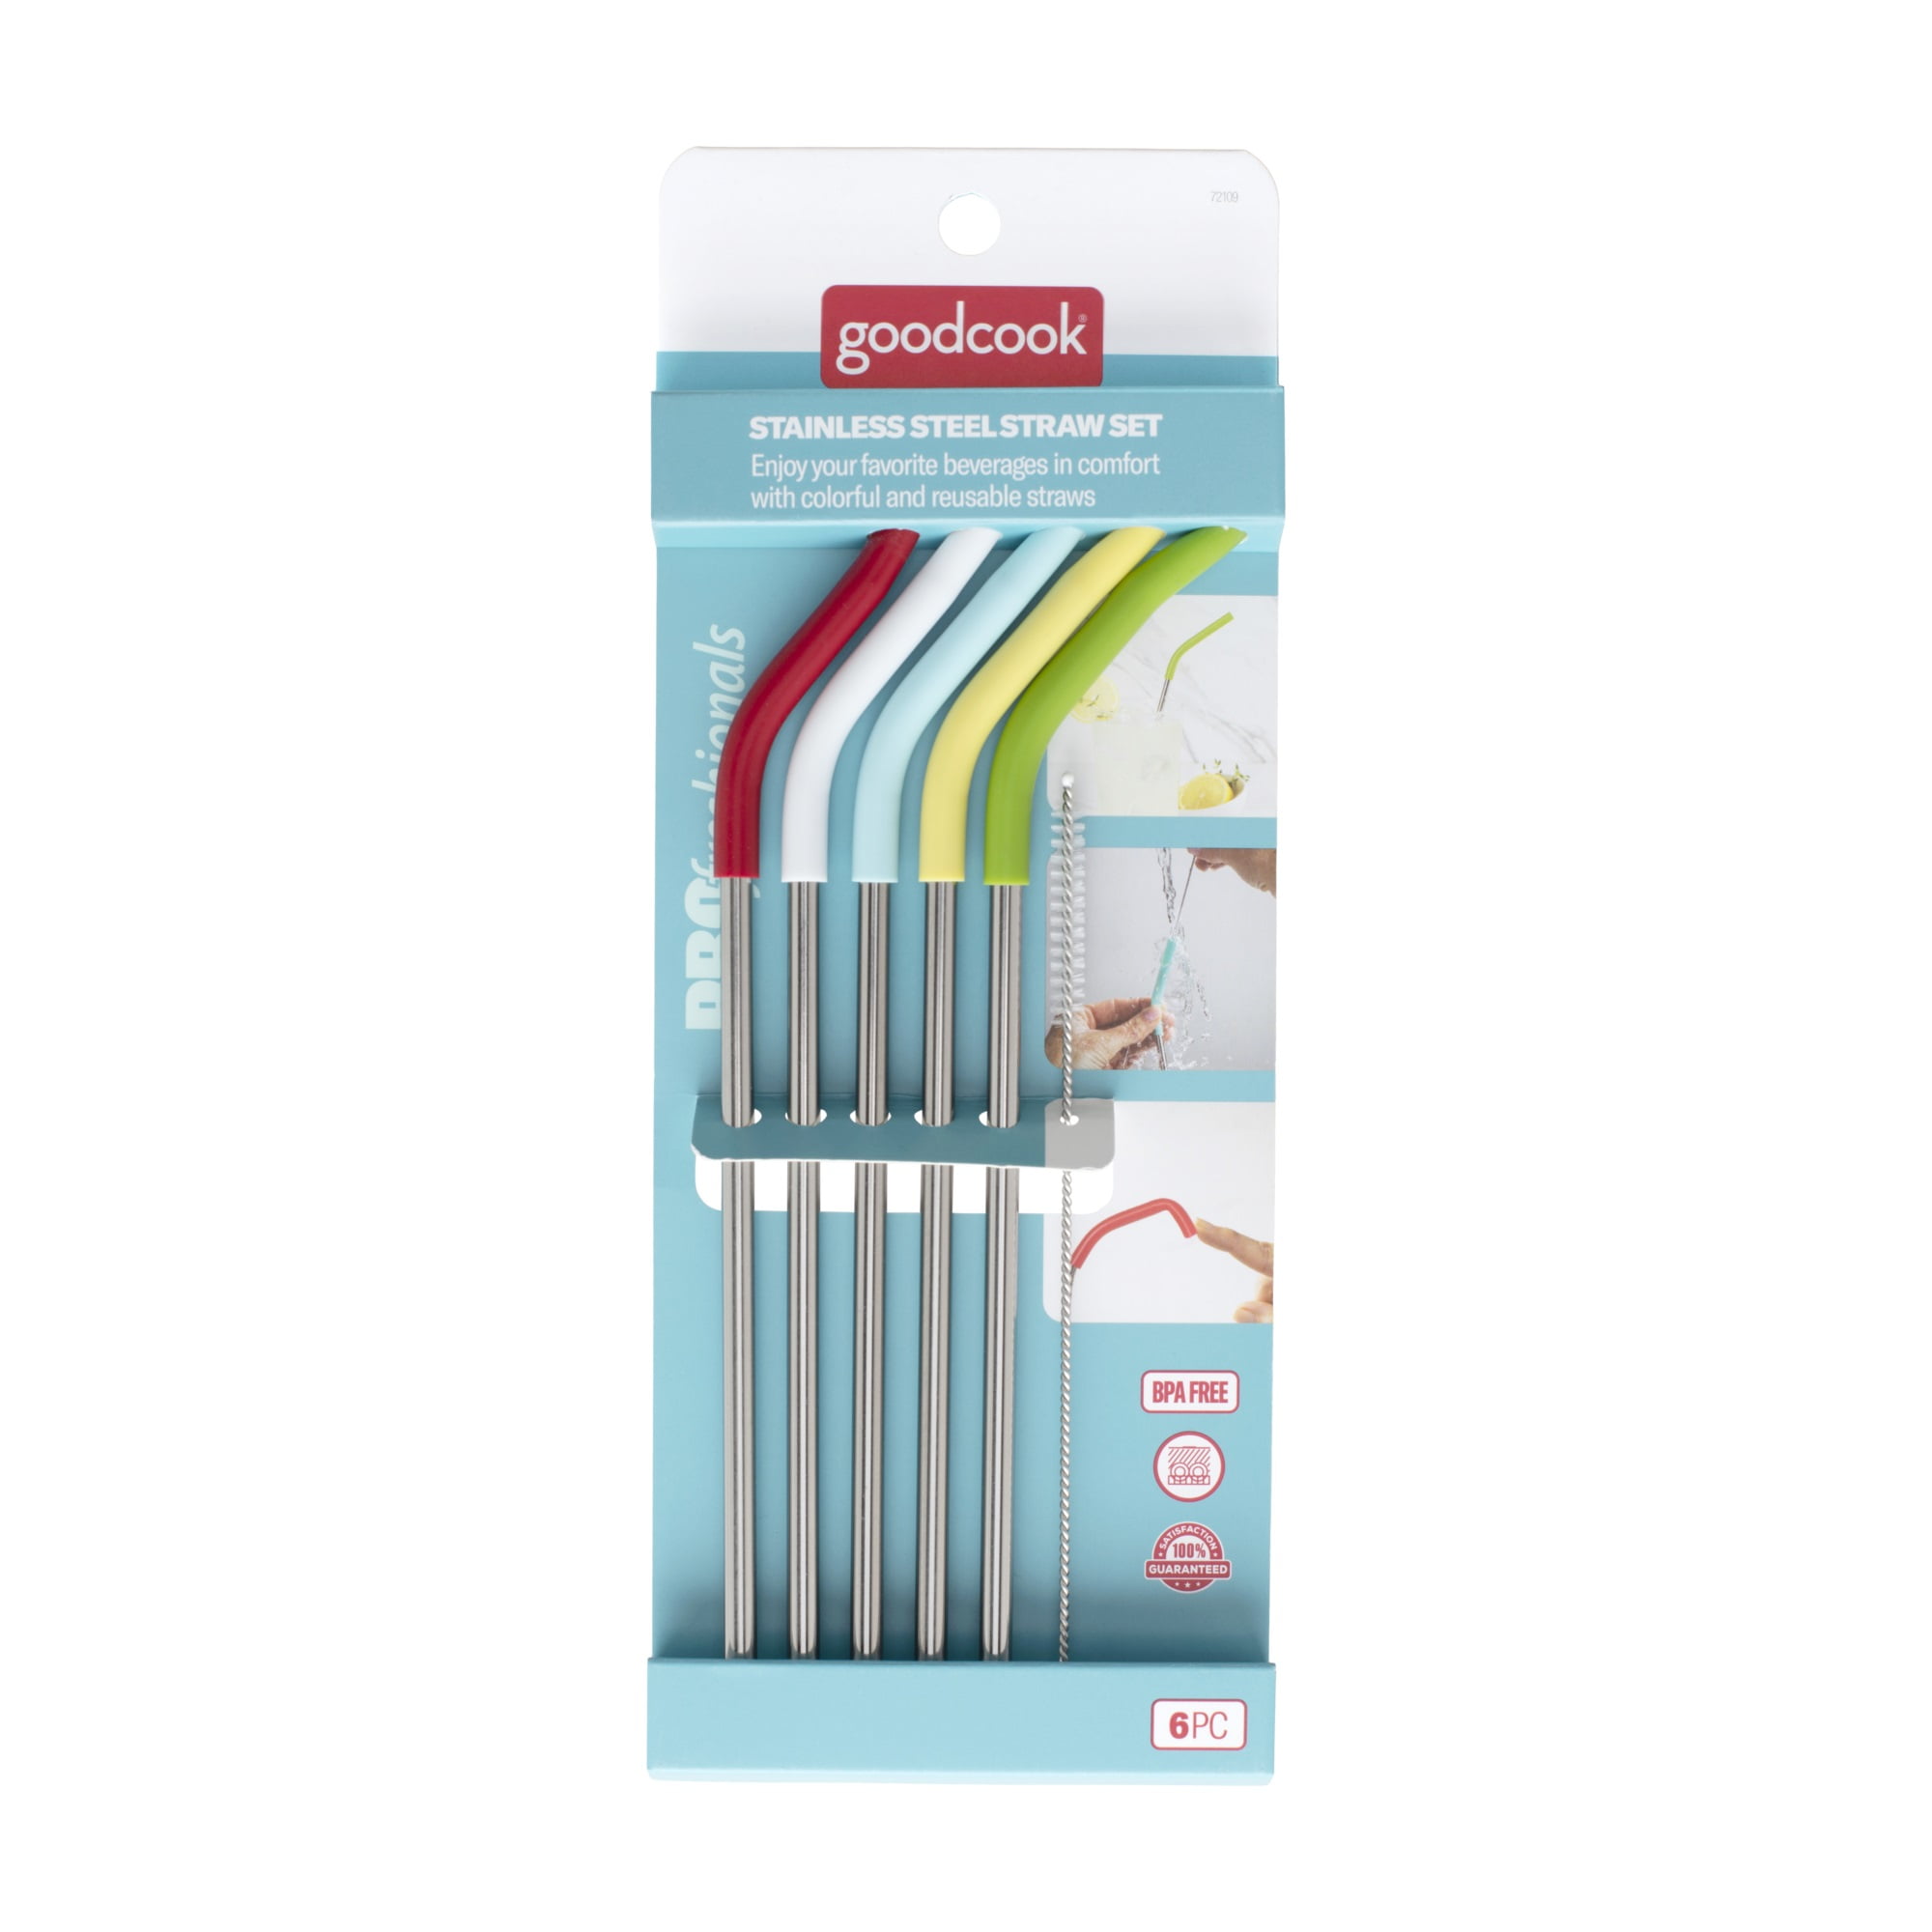 GoodCook Profreshionals Stainless Steel Reusable Straws with Cleaning Brush, Pack of 5